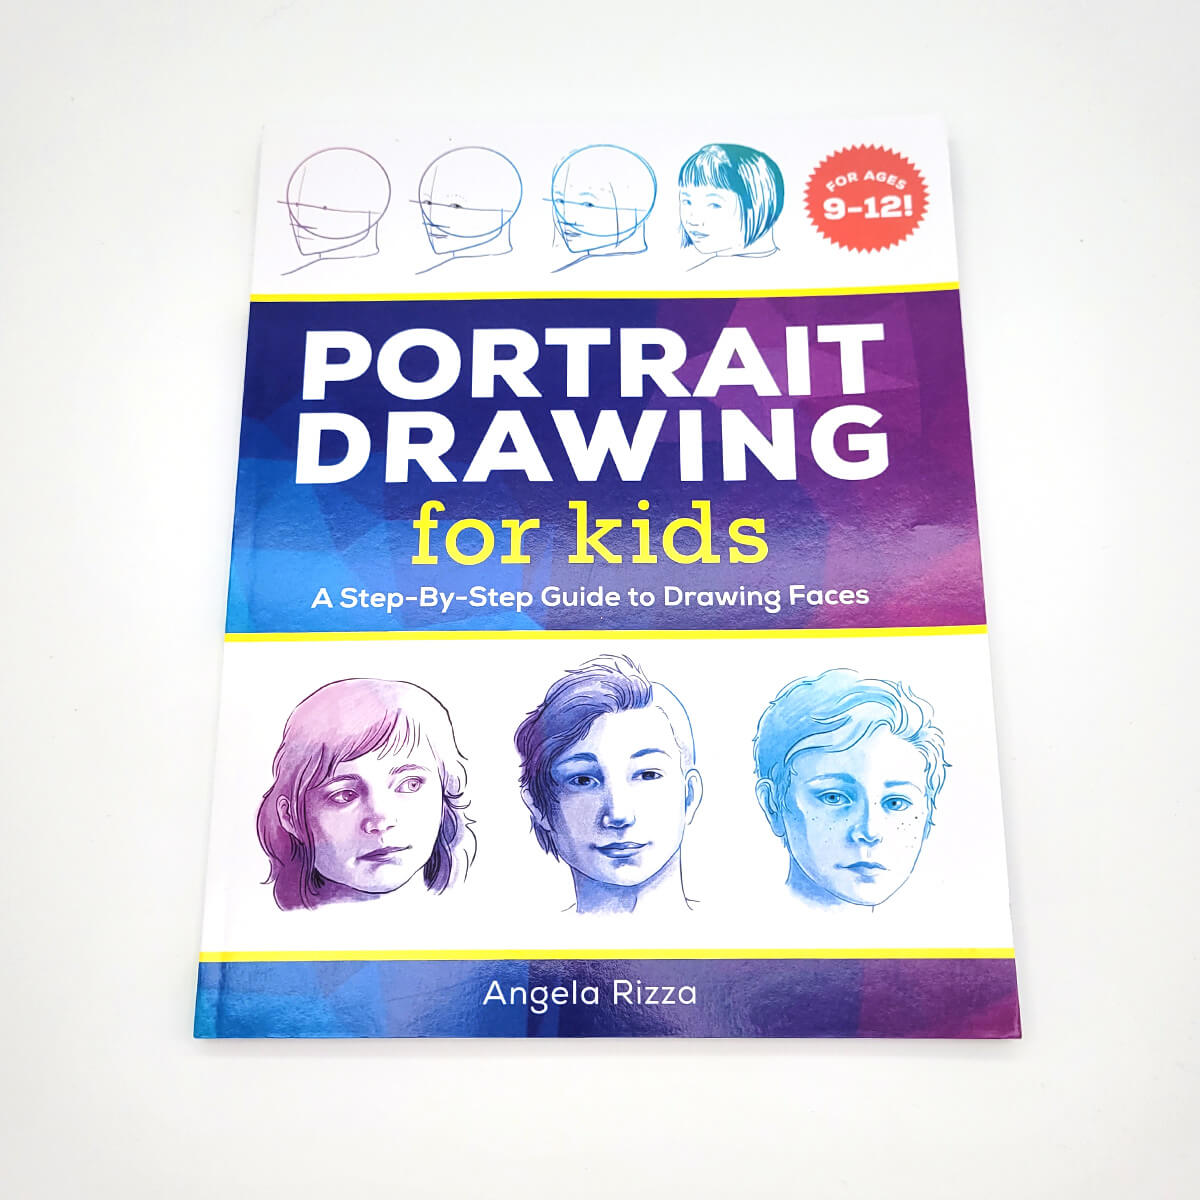 Portrait drawing for kids (for ages 9-12)